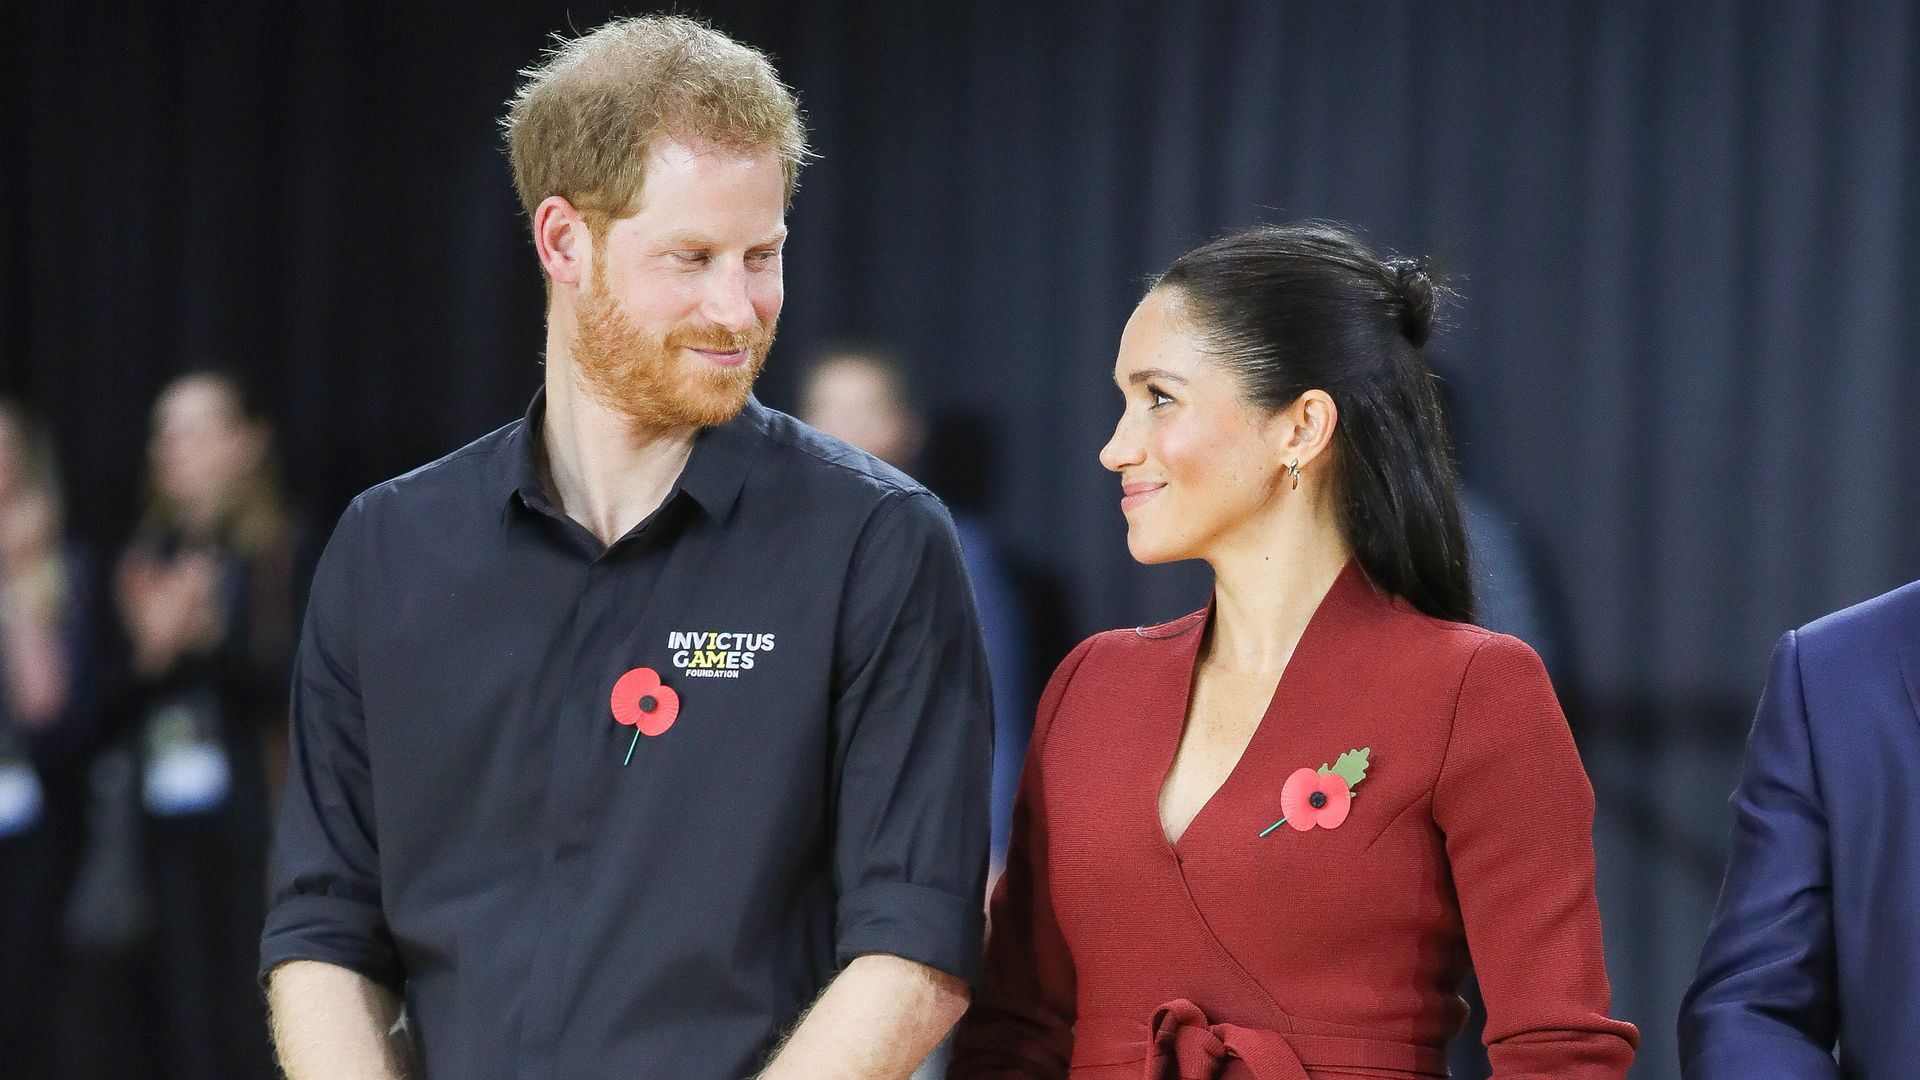 Harry and Meghan at Invictus Games Sydney 2018 